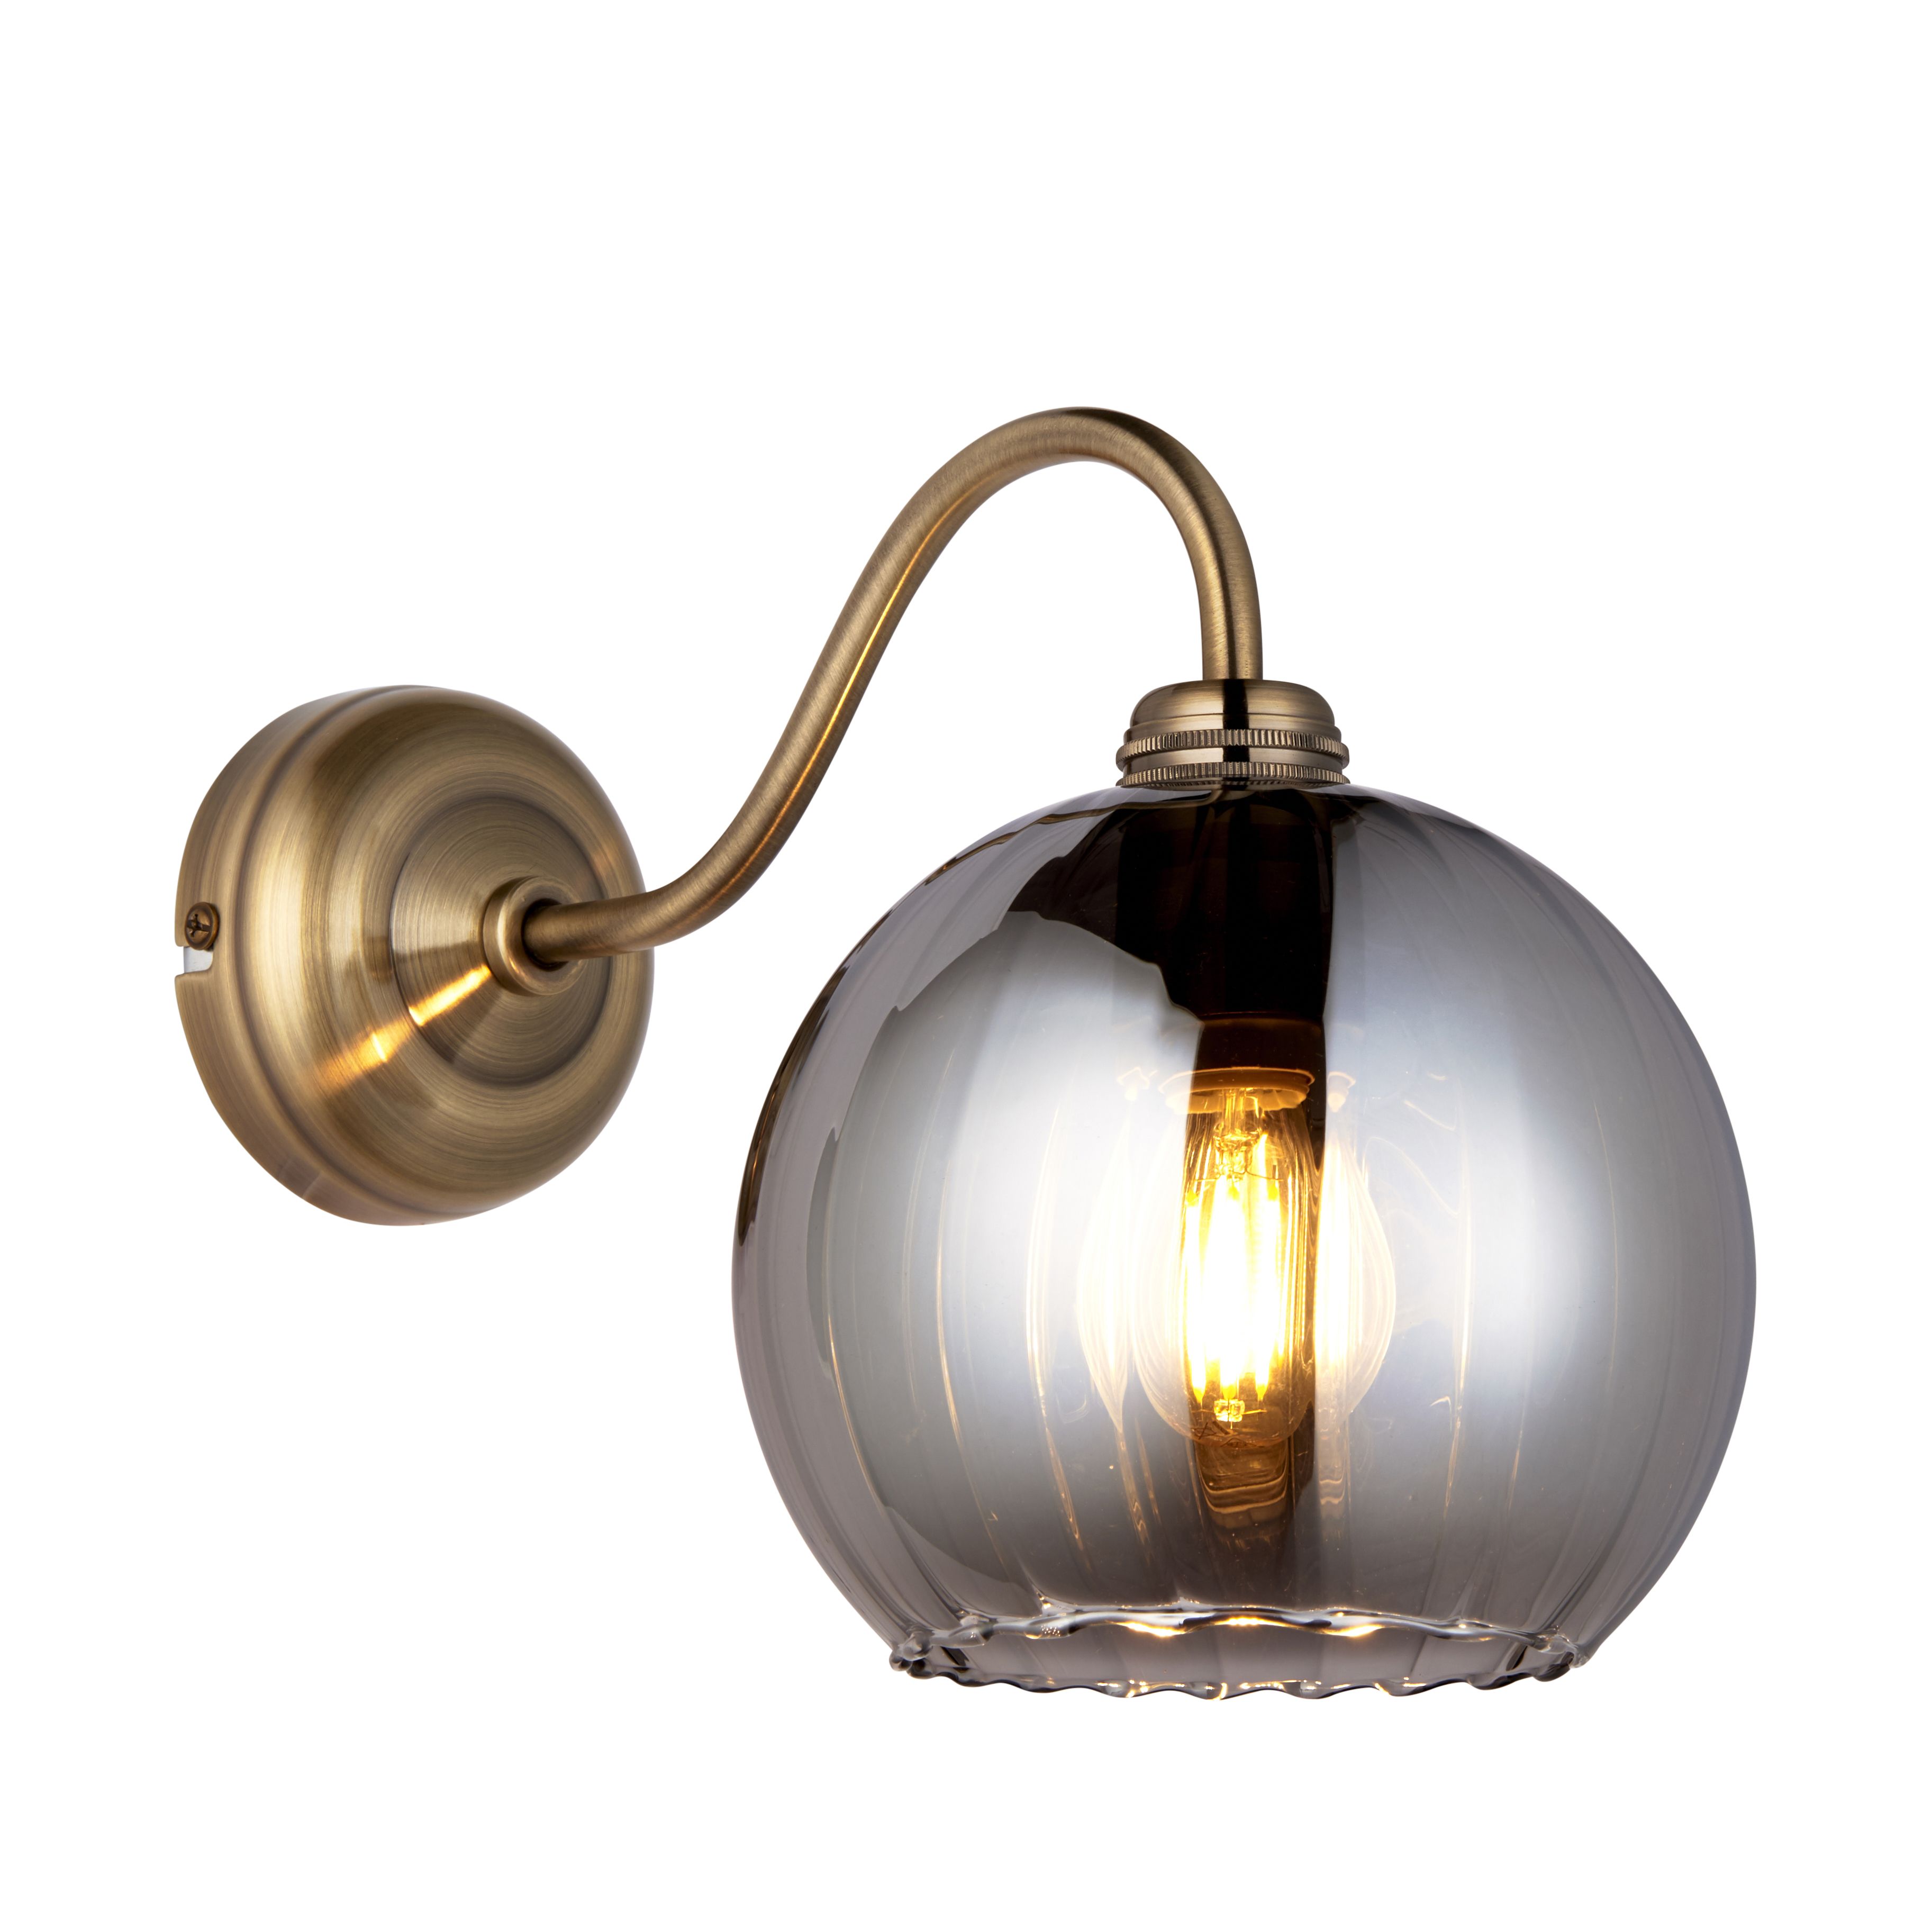 Priva Ribbed Antique brass effect Wired Wall light 94672